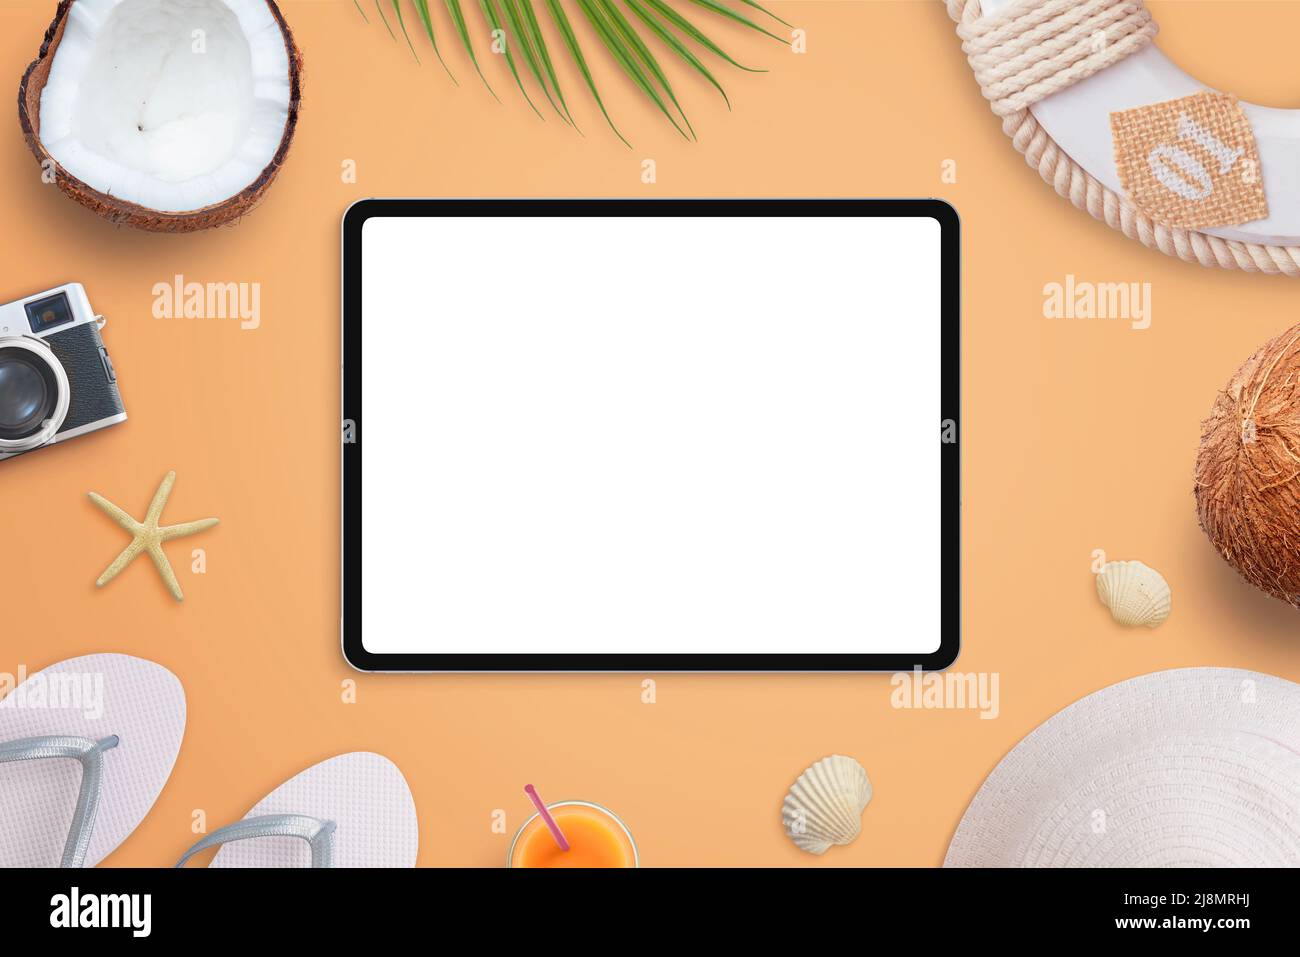 Tablet mockup on beach concept. Isolated screen for design promotion. Top view, flat lay composition with traveler accessories Stock Photo